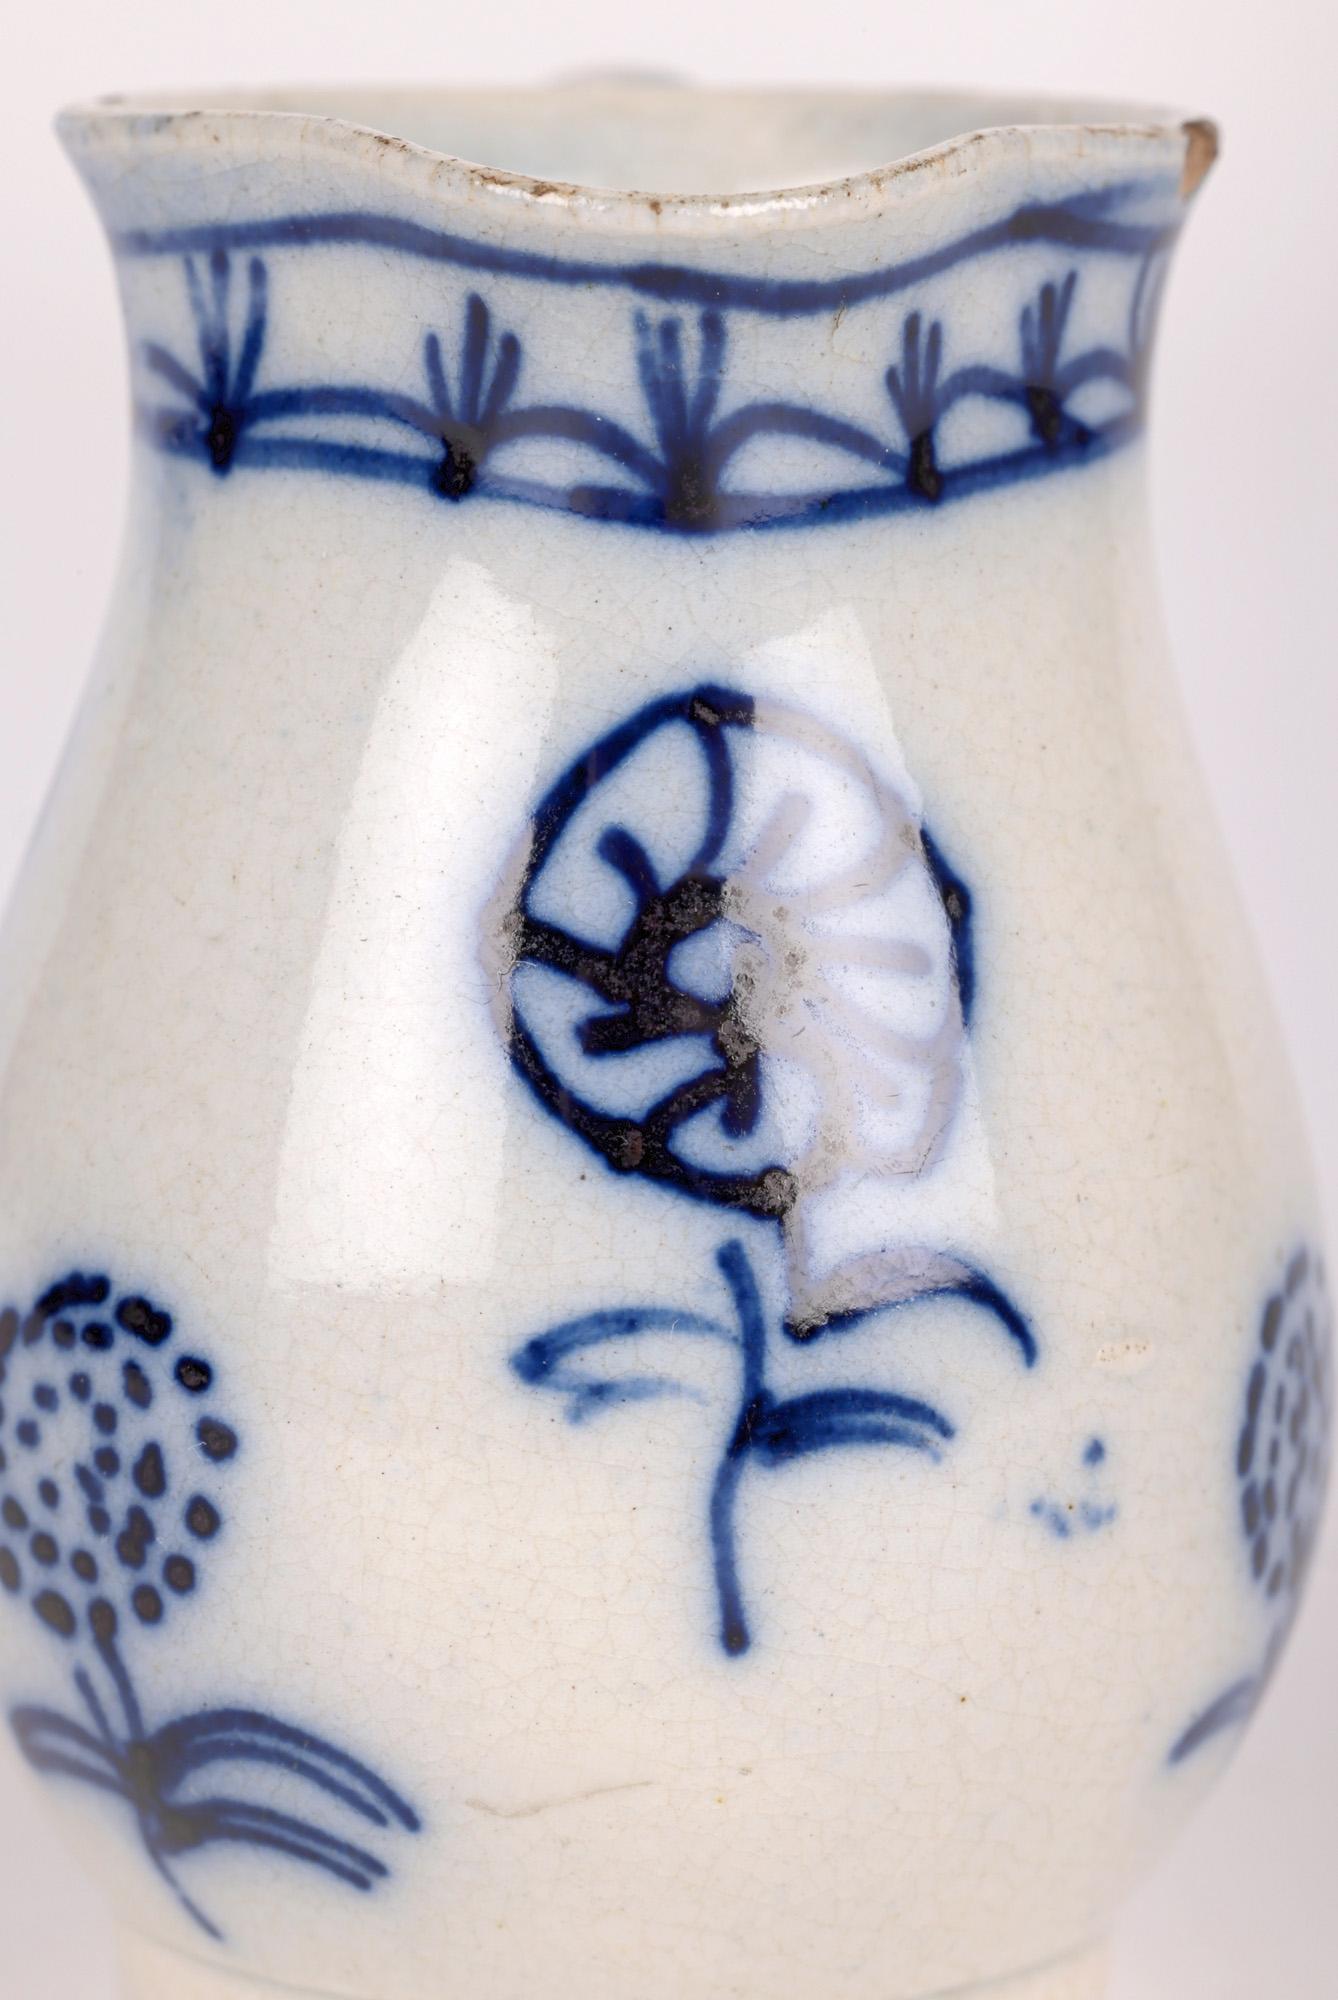 A delightful and rare antique English pearlware hand painted miniature jug dating from the latter 18th century. The bulbous shaped jug has a simple ear shaped loop handle to one side with top with a wide shaped pouring spout. The body of the jug is